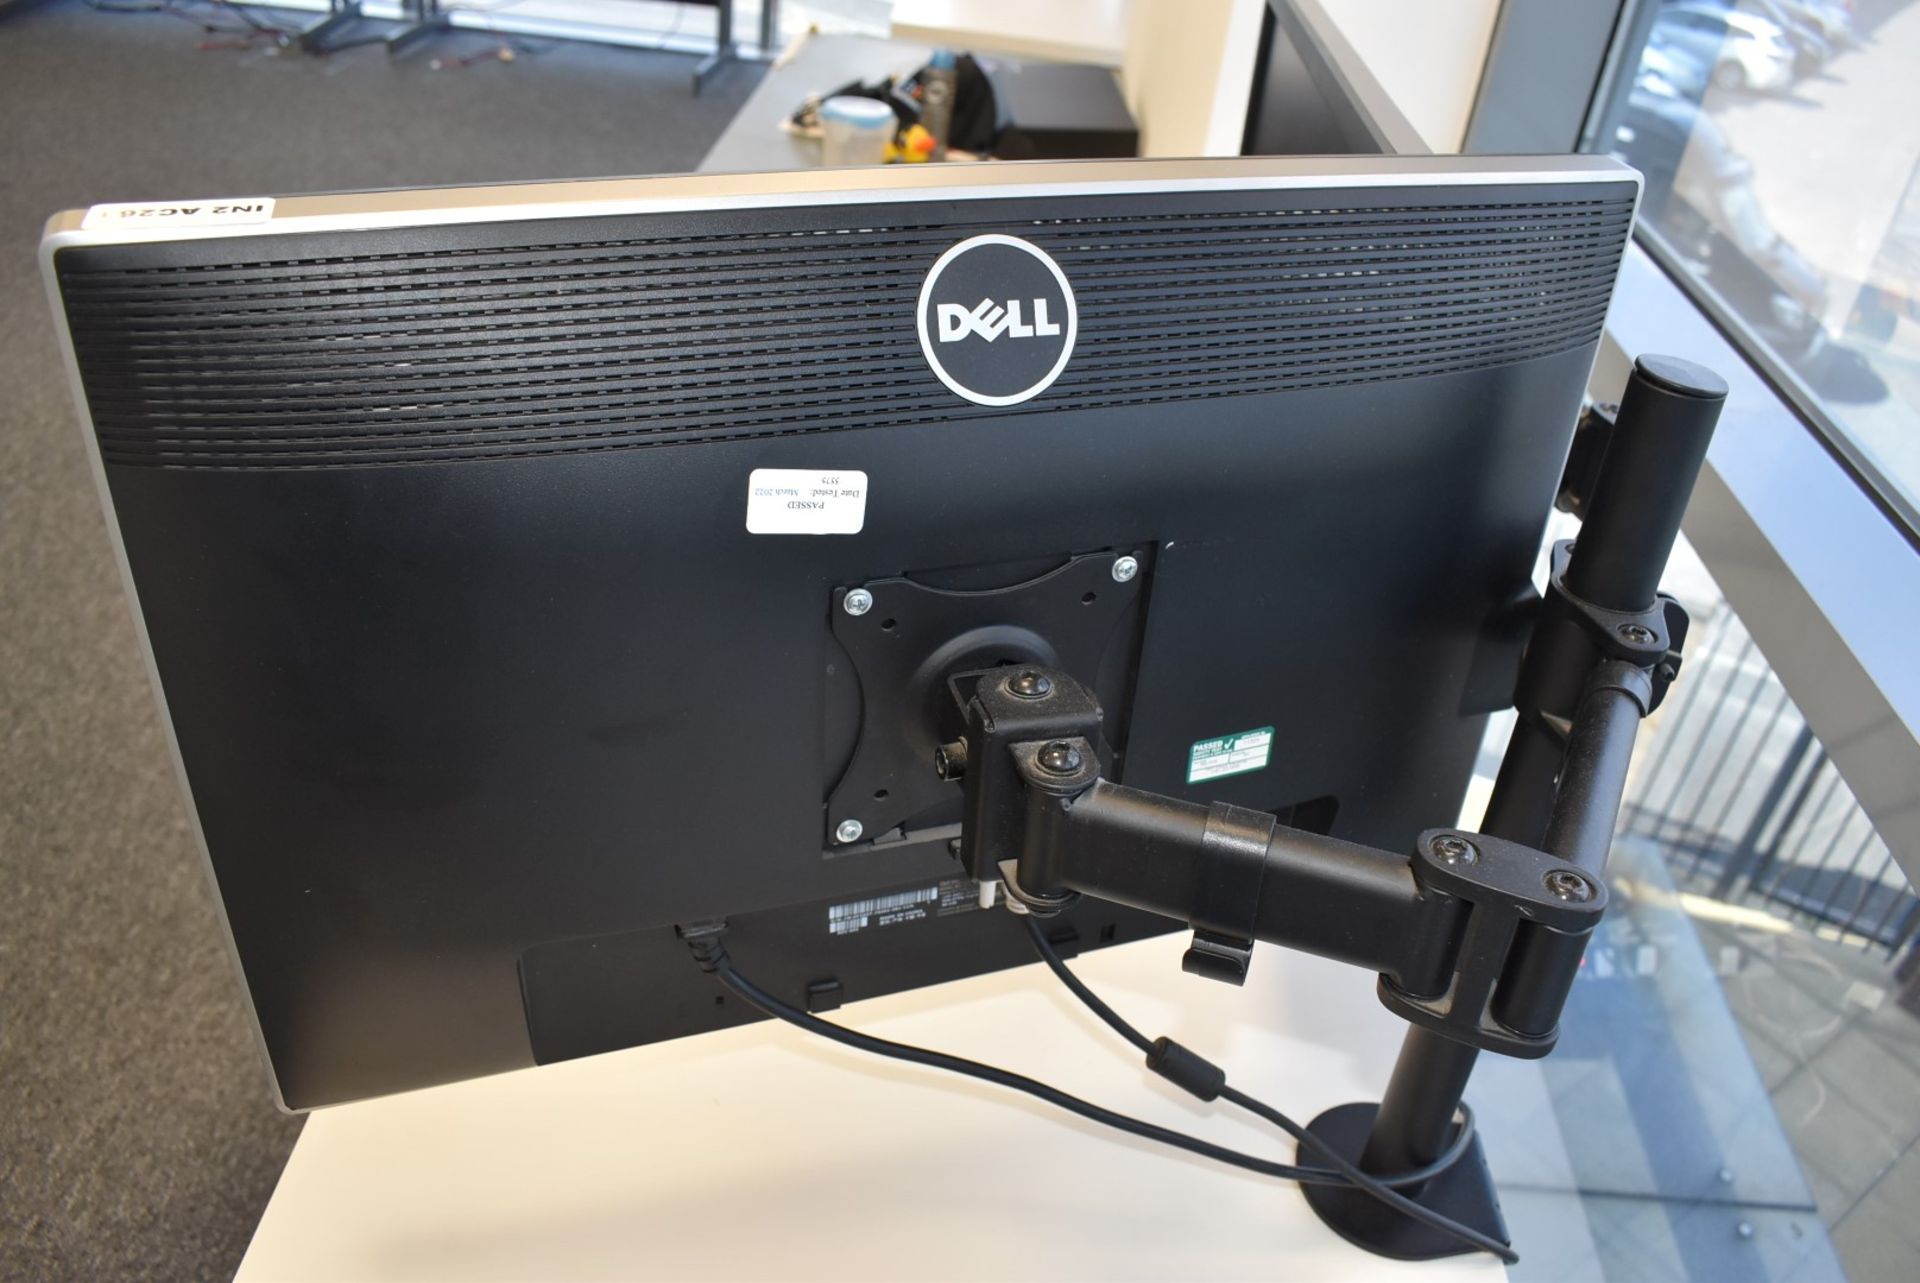 2 x Dell 24 Inch UltraSharp Full HD LED Monitors With Desk Mounted Adjustable Twin Stand, Power - Image 7 of 7